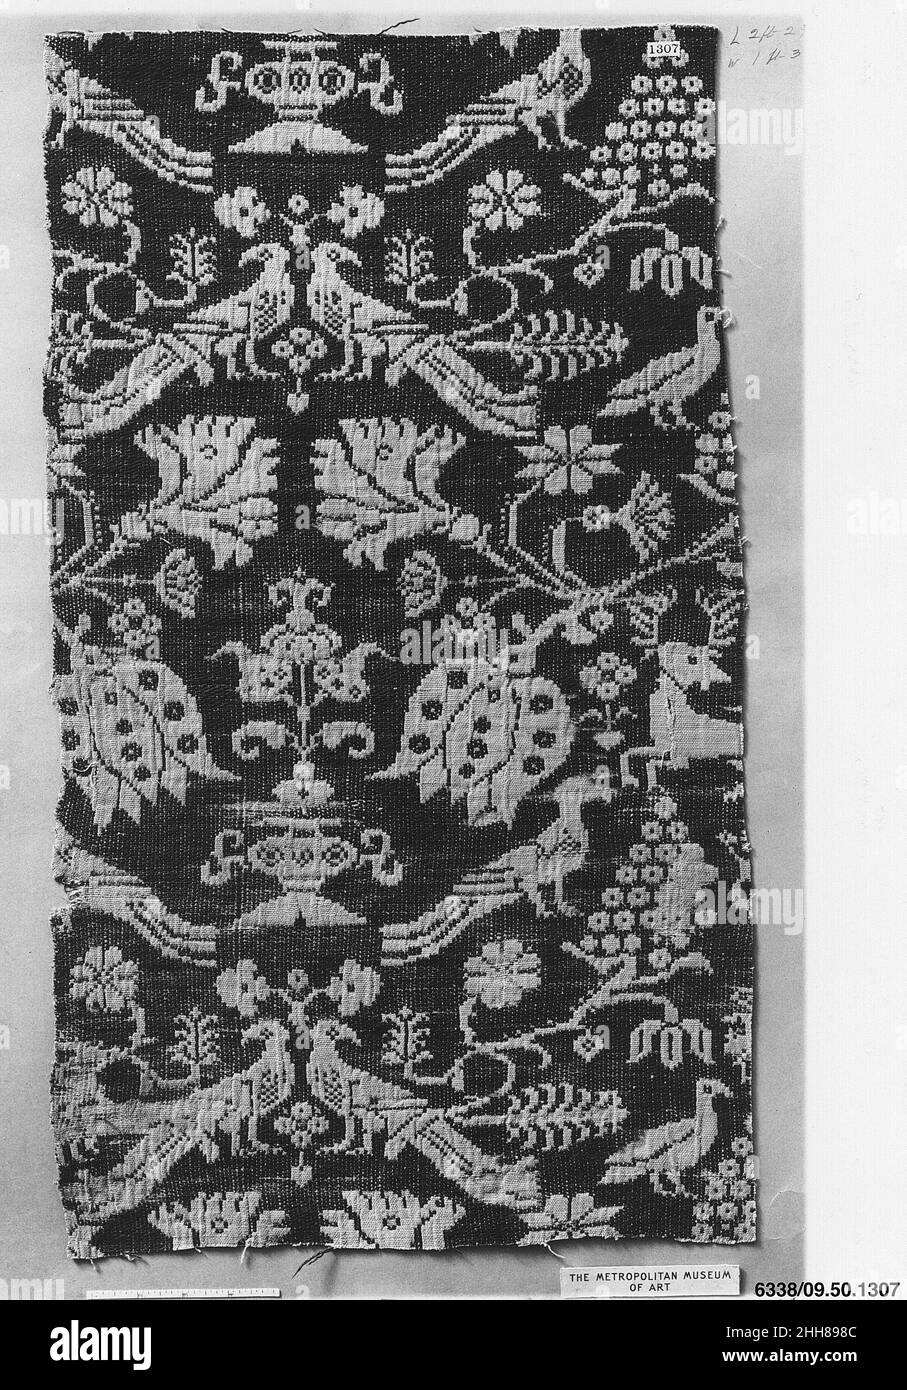 Piece 18th century German, Schleswig-Holstein Silk textiles composed of paired animals nestled in dense foliage were woven in Europe before 1400 and were probably inspired by precious Central Asian textiles. These two double cloths [34.41.7 and 09.50.1037] illustrate how the tradition continued, and their graphic quality mirrors that of Brother Rabbit.. Piece  216434 Stock Photo